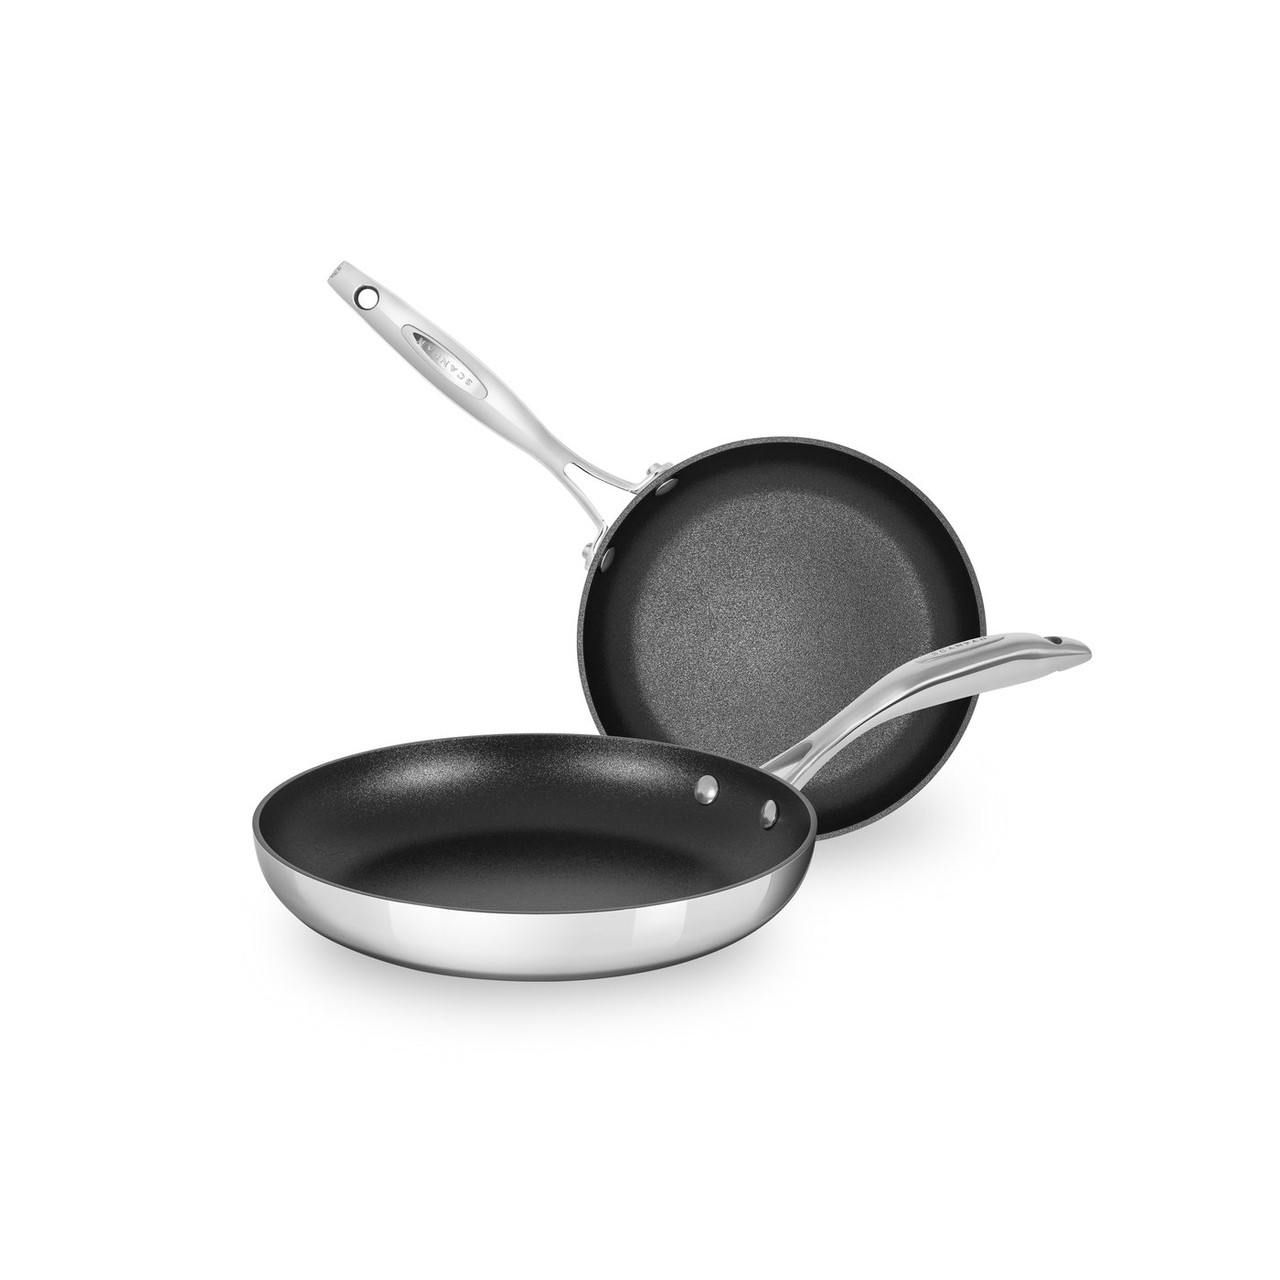  Scanpan Classic Nonstick Fry Pan Skillet Set with Lids (8 &  10.25-inch): Home & Kitchen